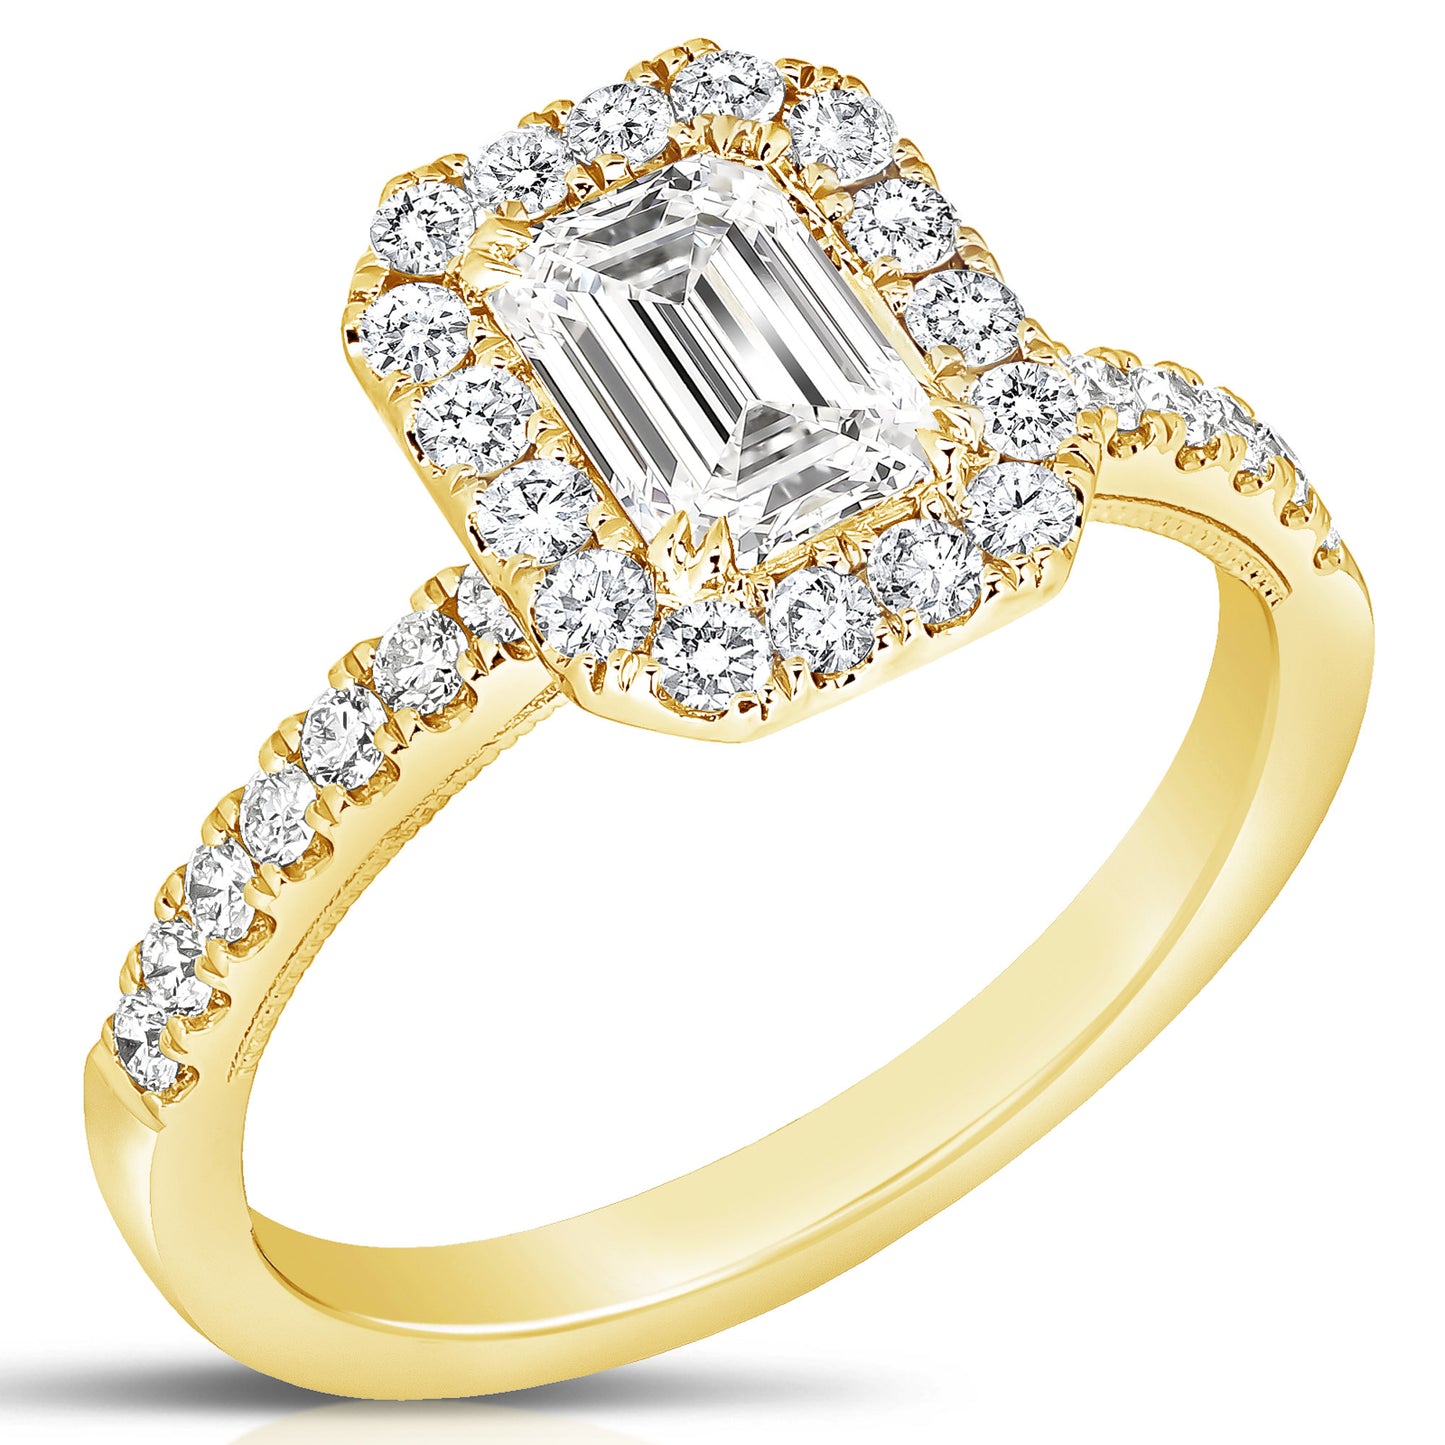 1 CT CENTER EMERALD CUT HALO LAB GROWN ENGAGEMENT RING